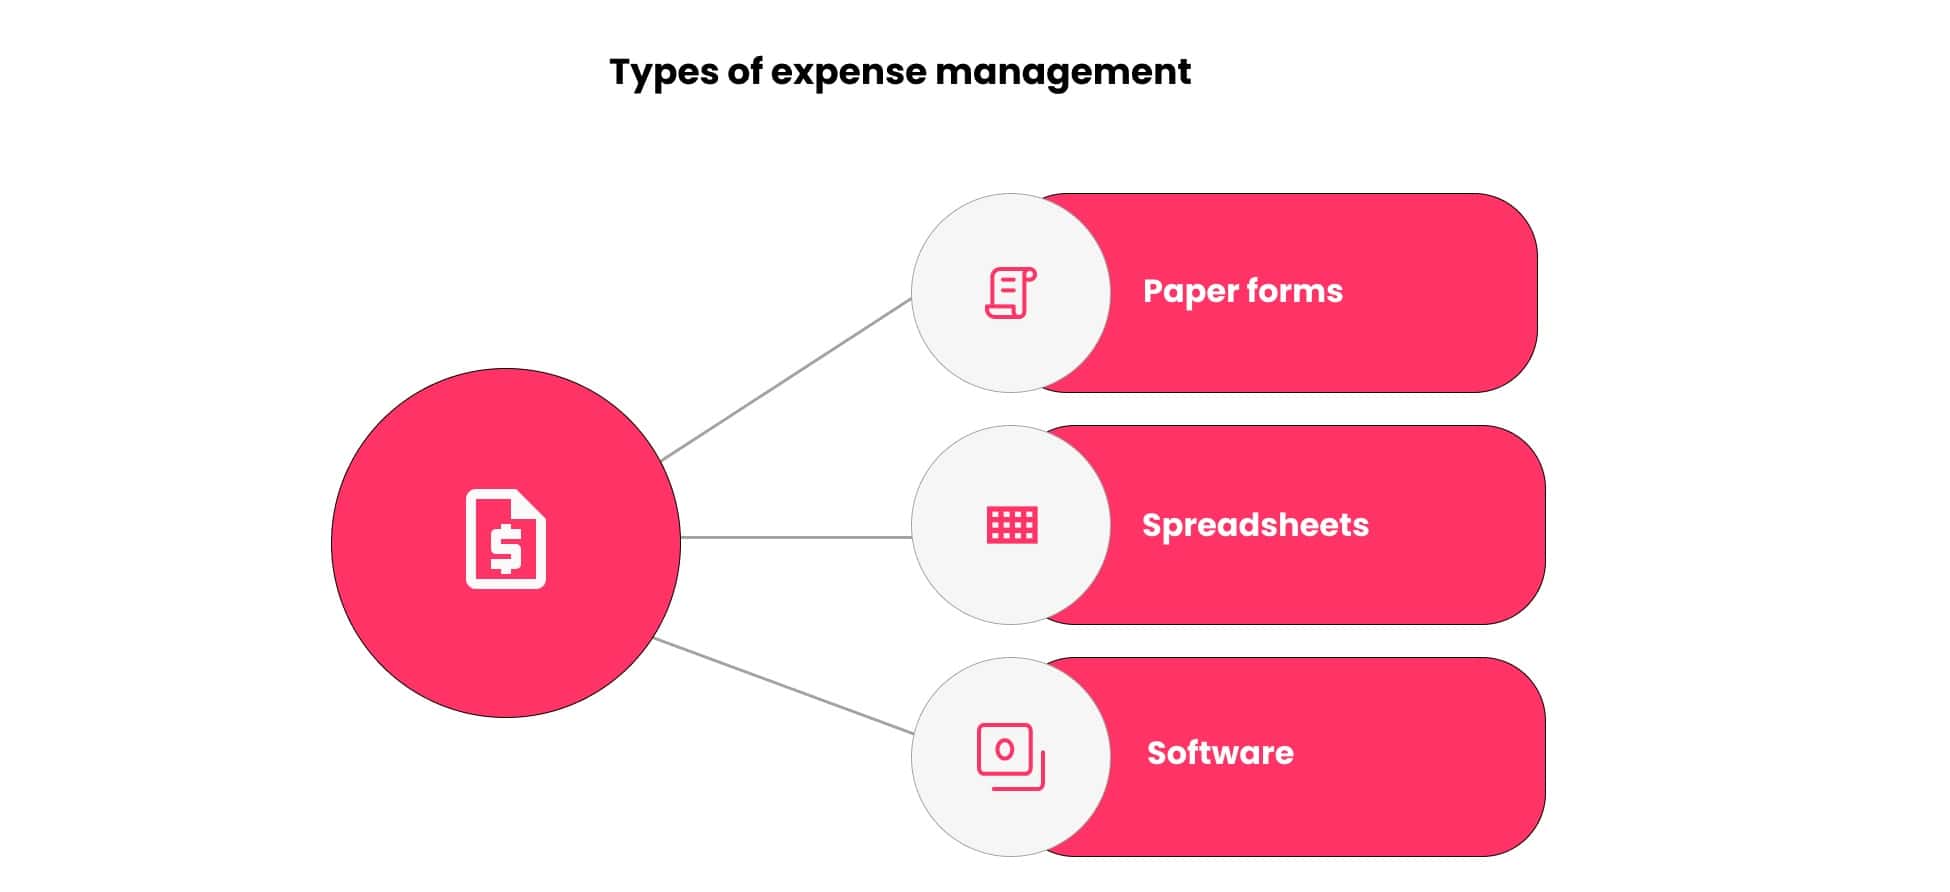 Types of expense management